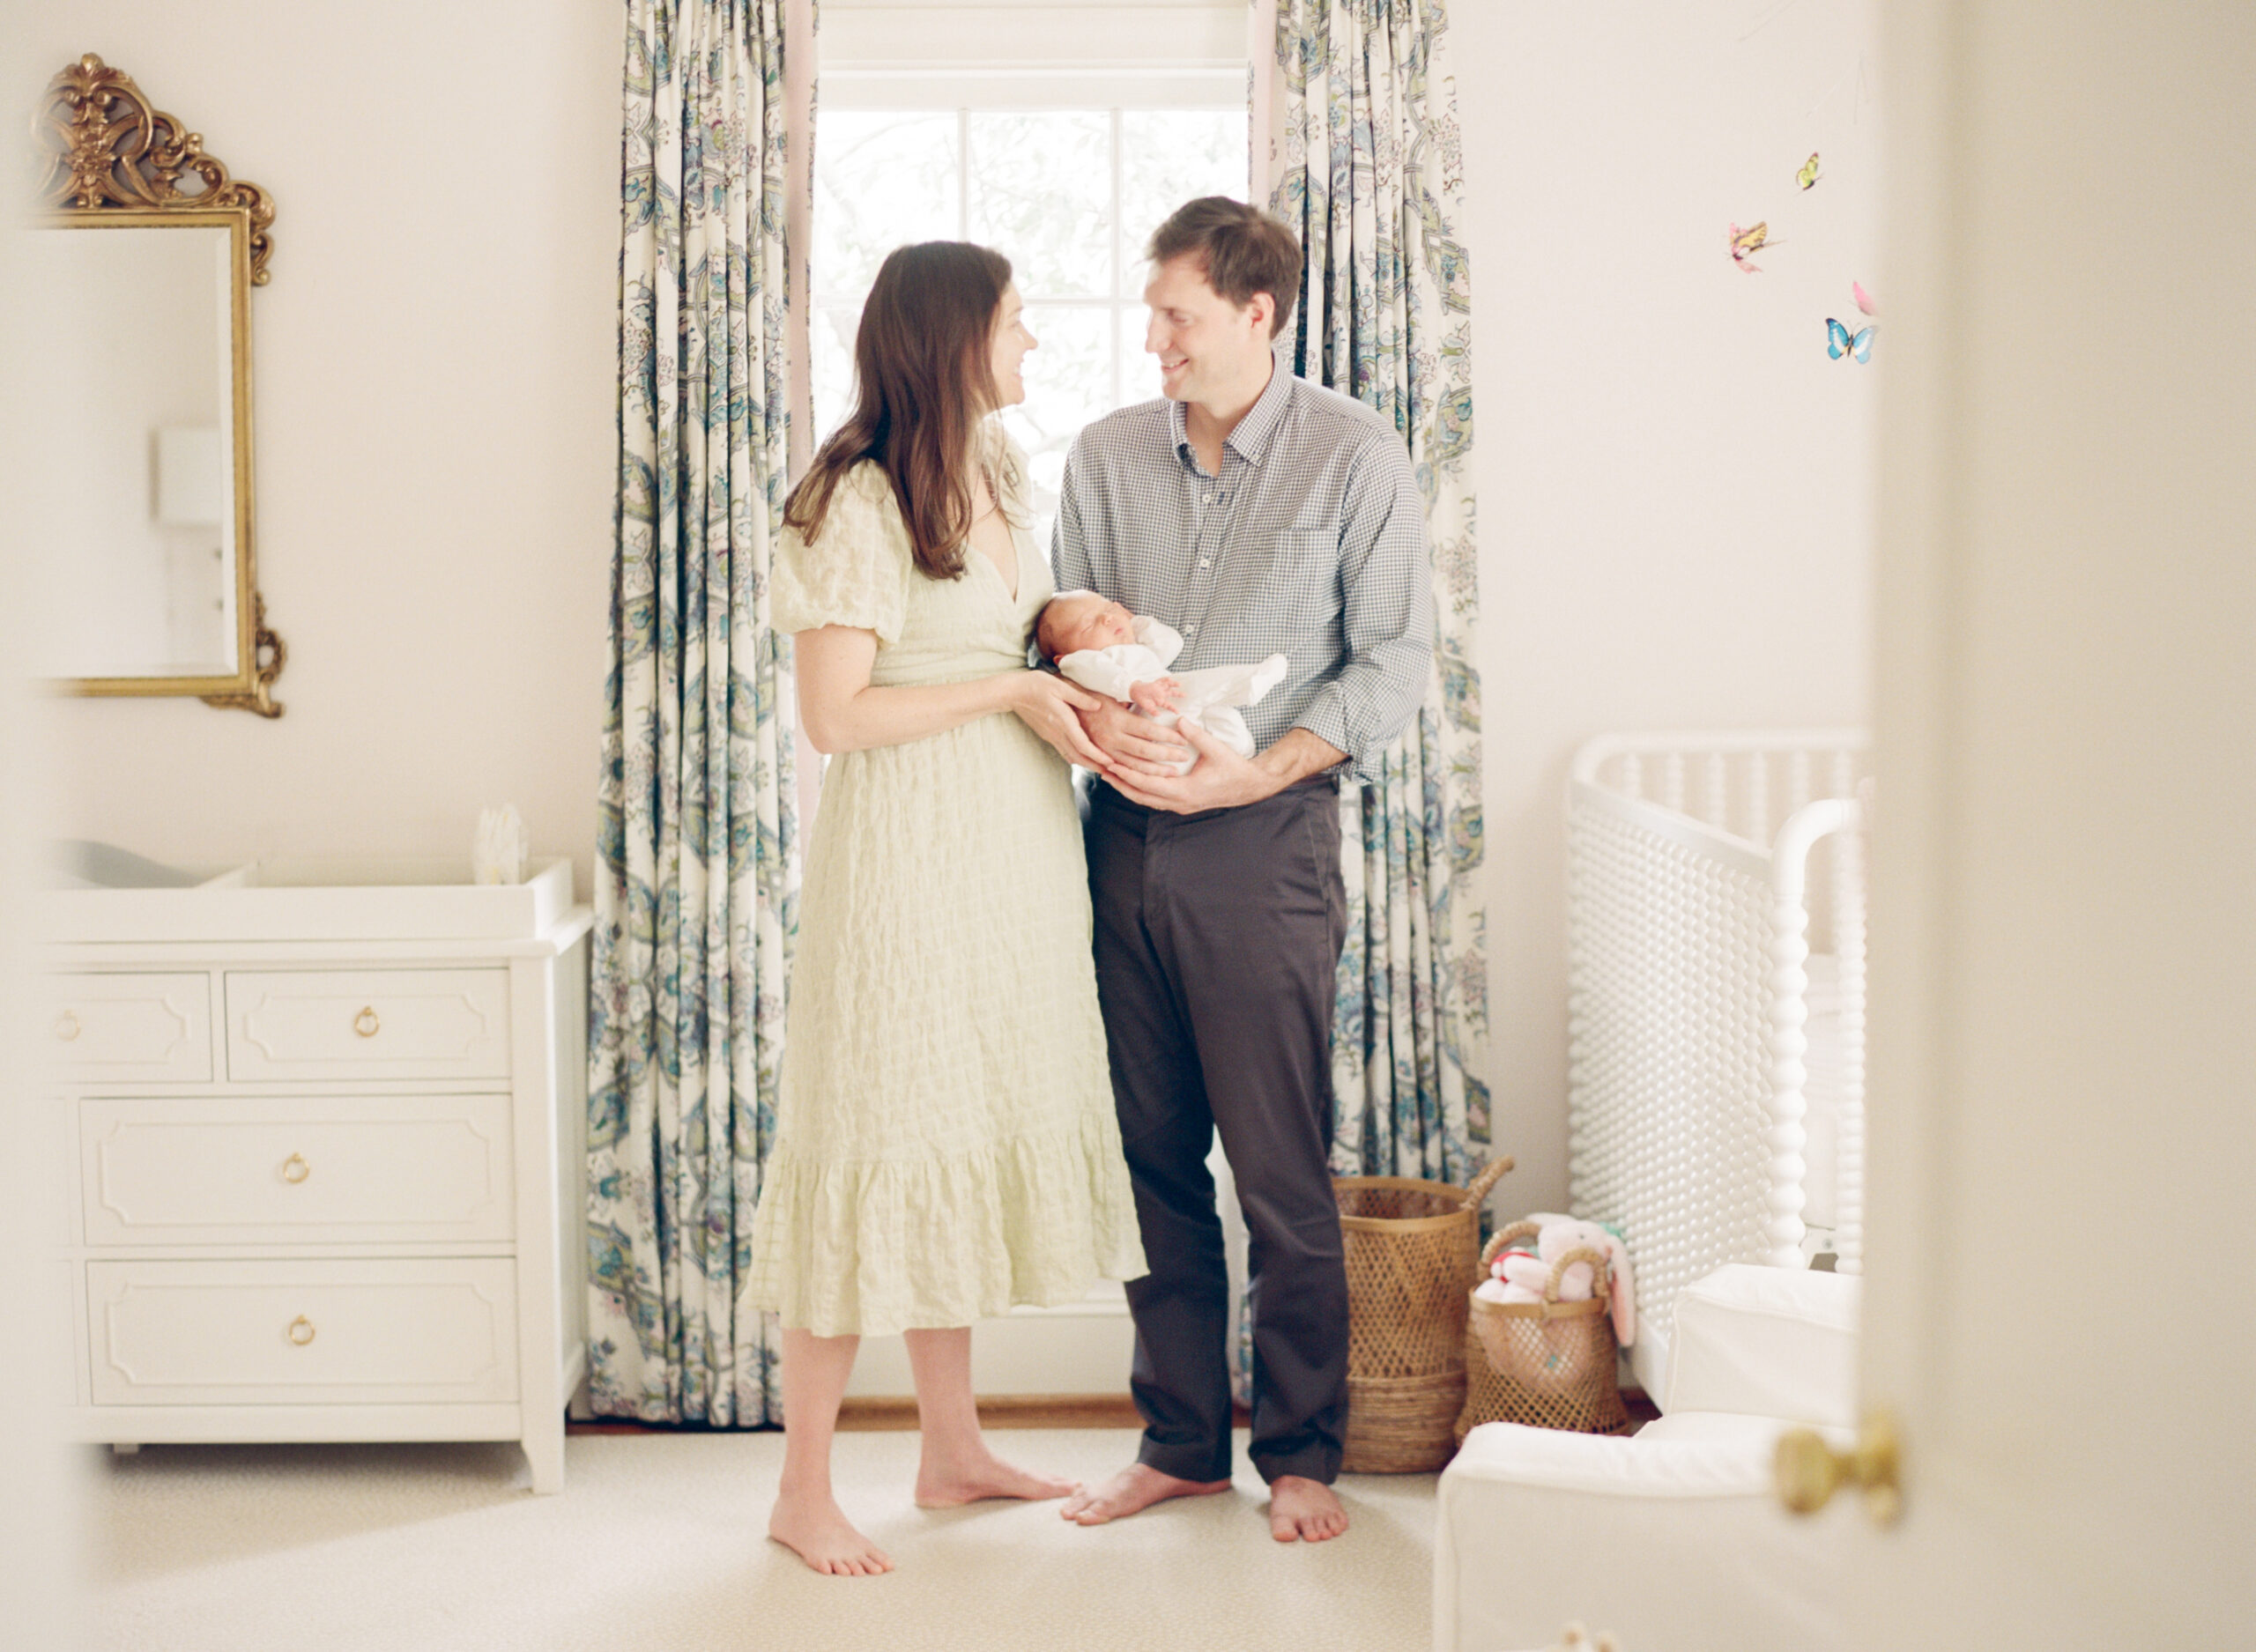 New parents smile at each other while holding their newborn daughter during their Charlotte newborn session. Image by Charlotte newborn photographer A.J. Dunlap Photography.